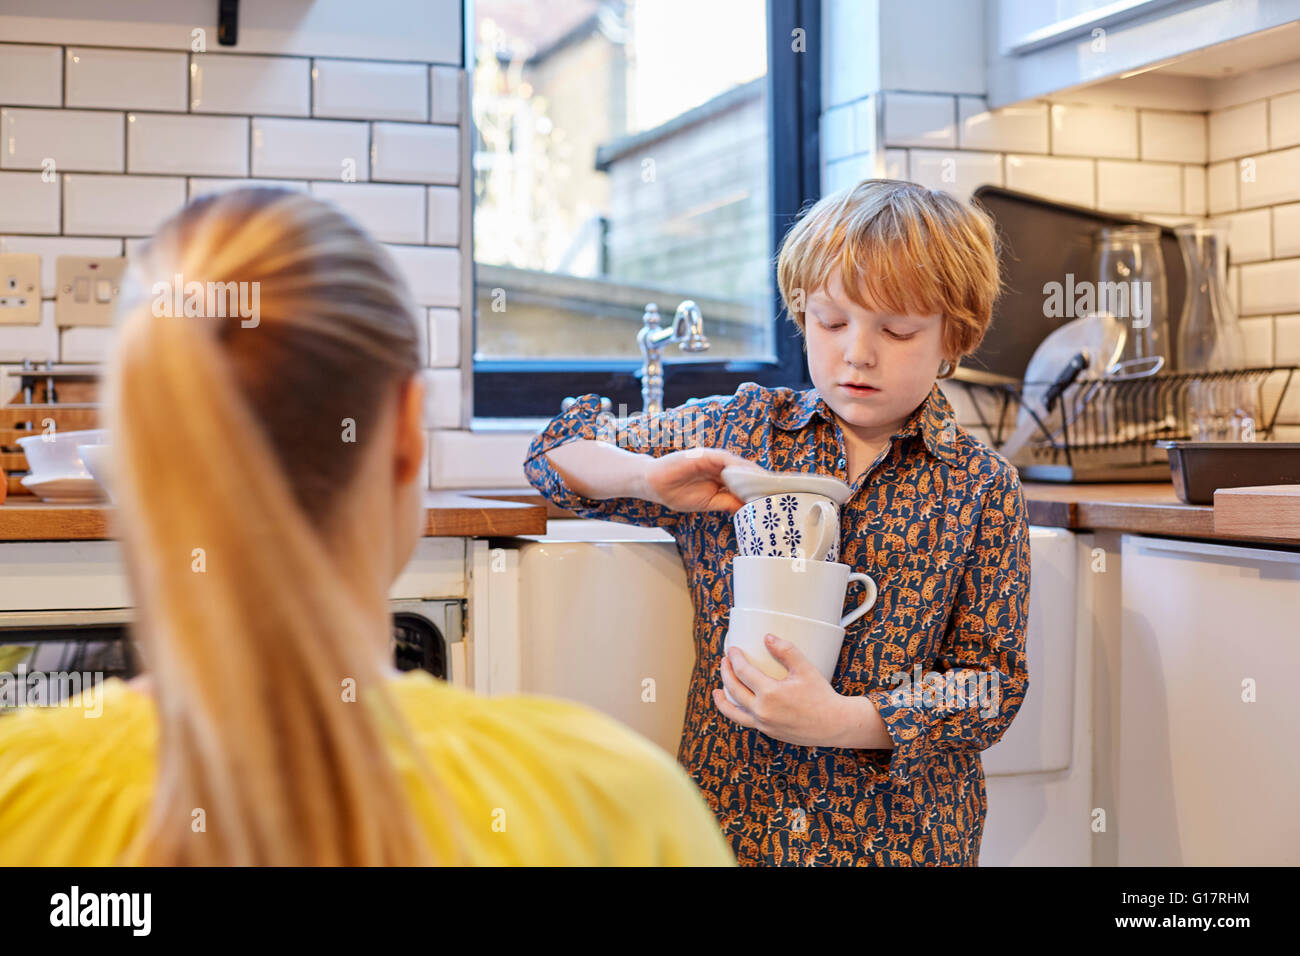 Boy carrying stack of mugs in kitchen Stock Photo